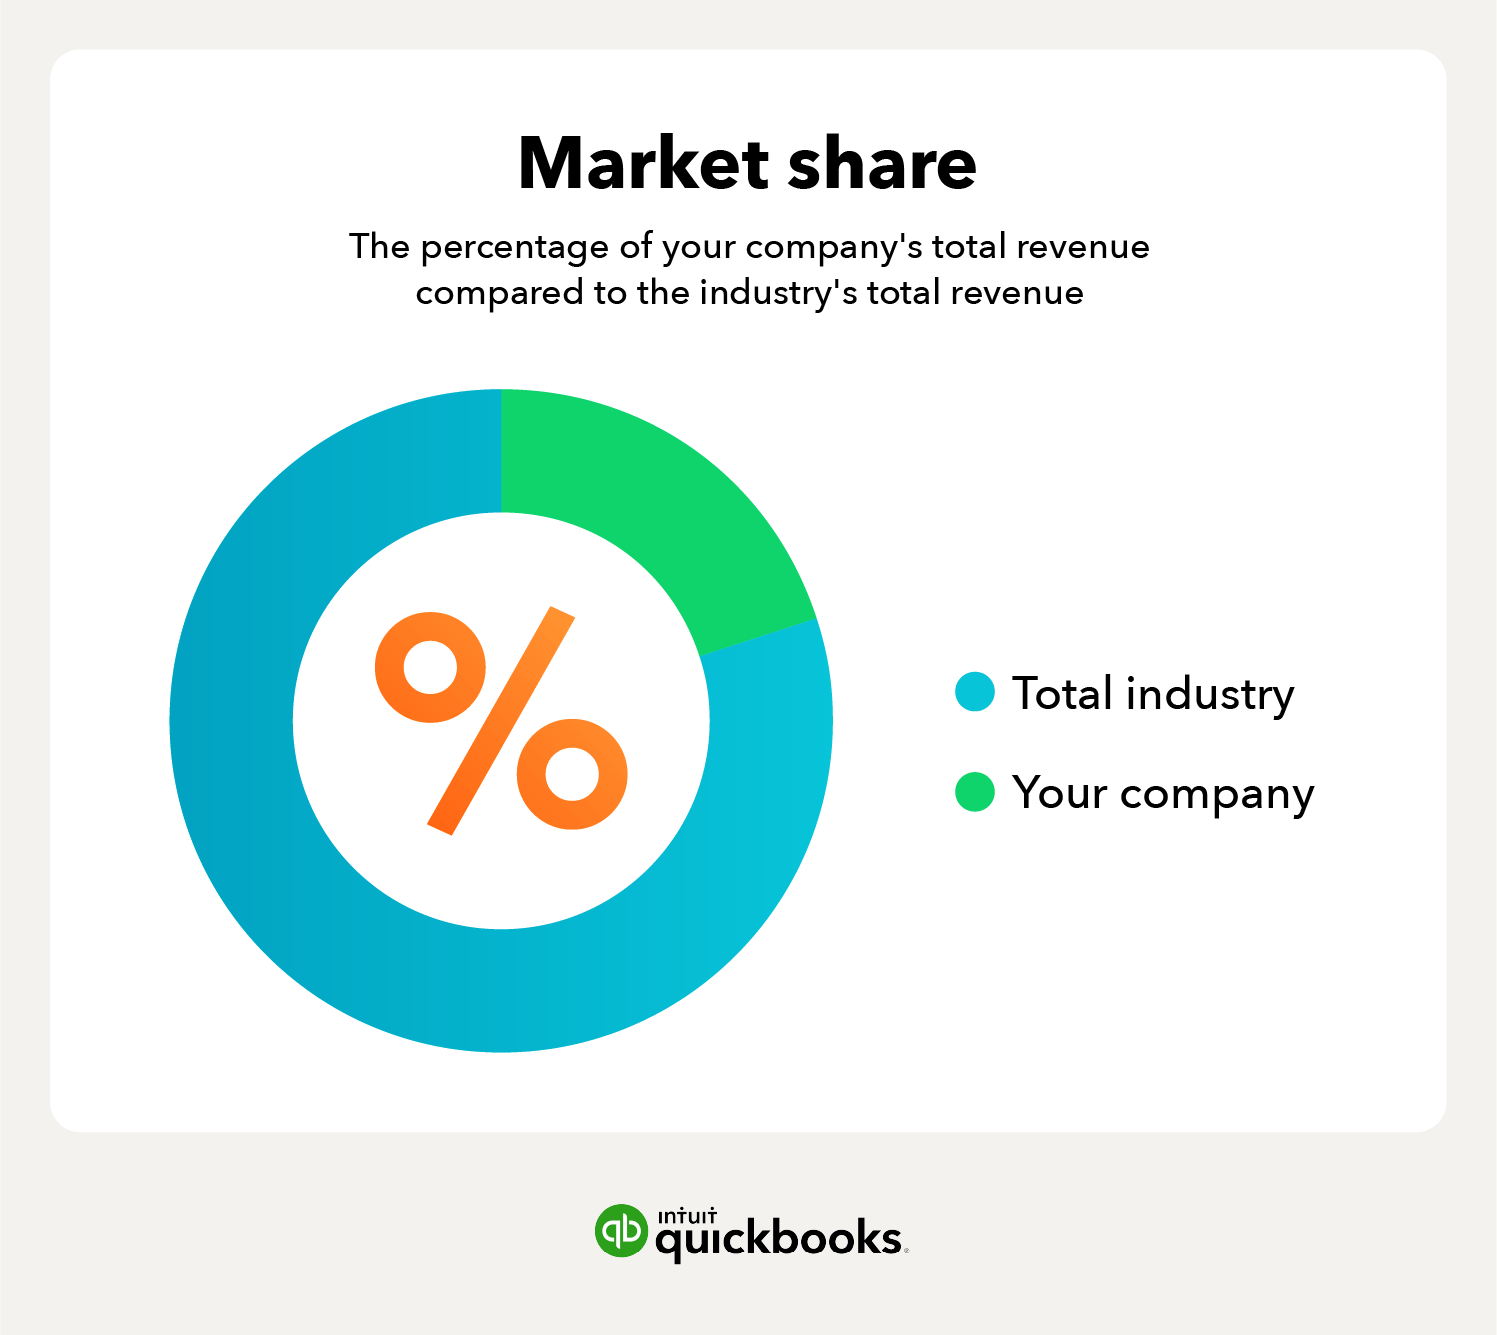 Description of market share with chart visual